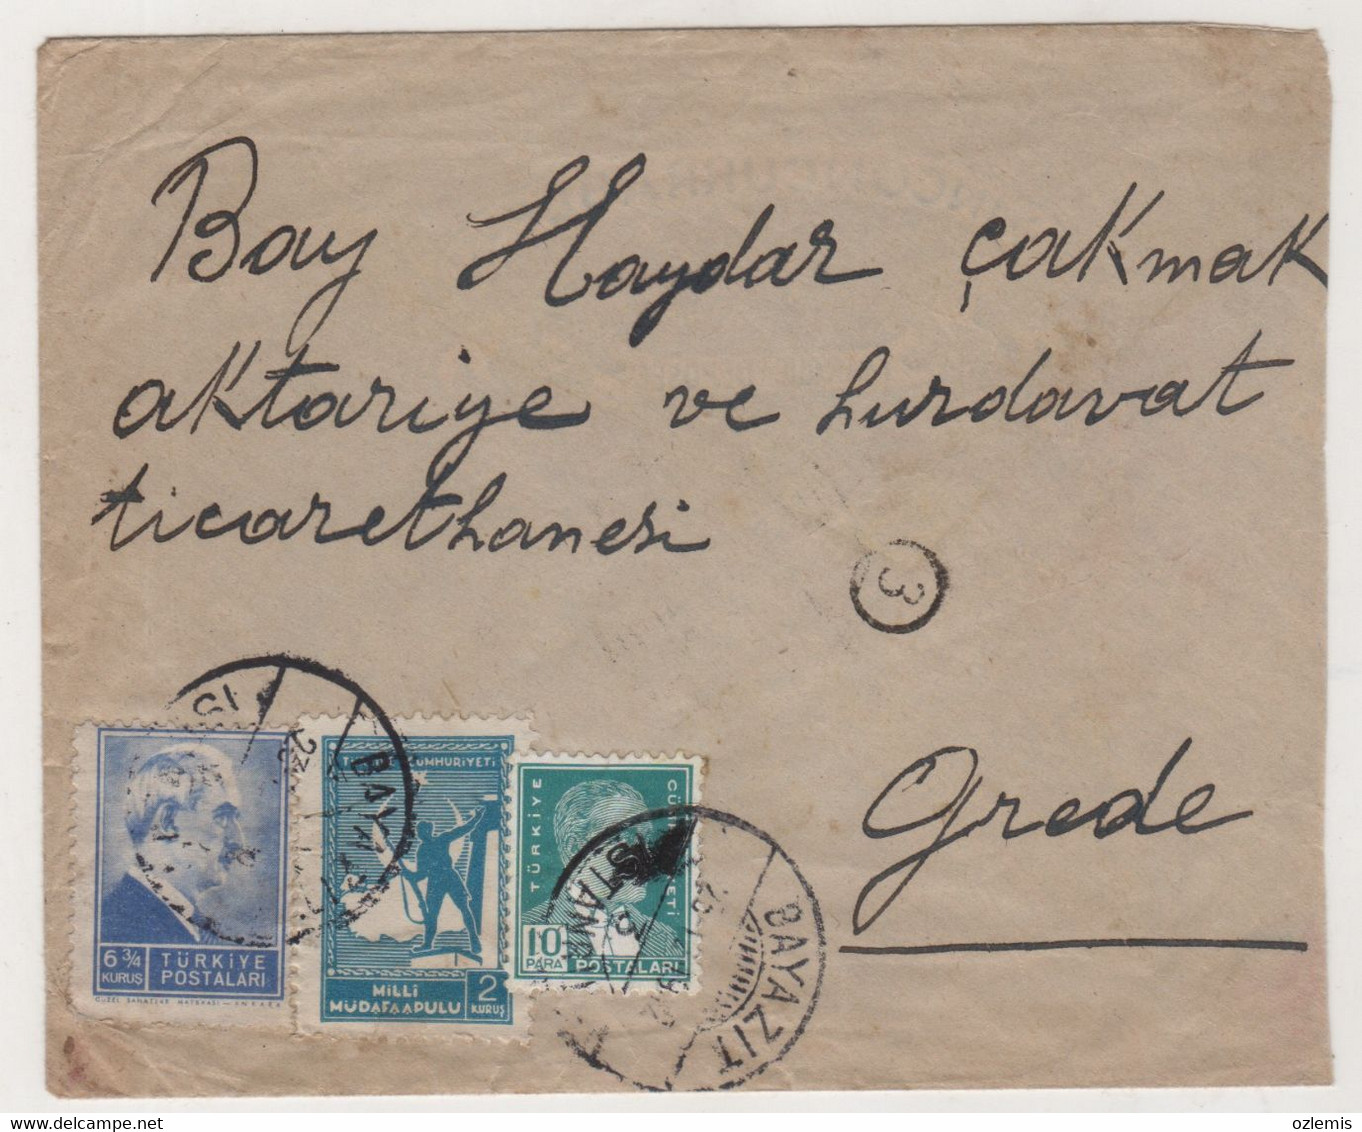 TURKEY -ISTANBUL  TO GEREDE 1942 ,USED  COVER - Covers & Documents